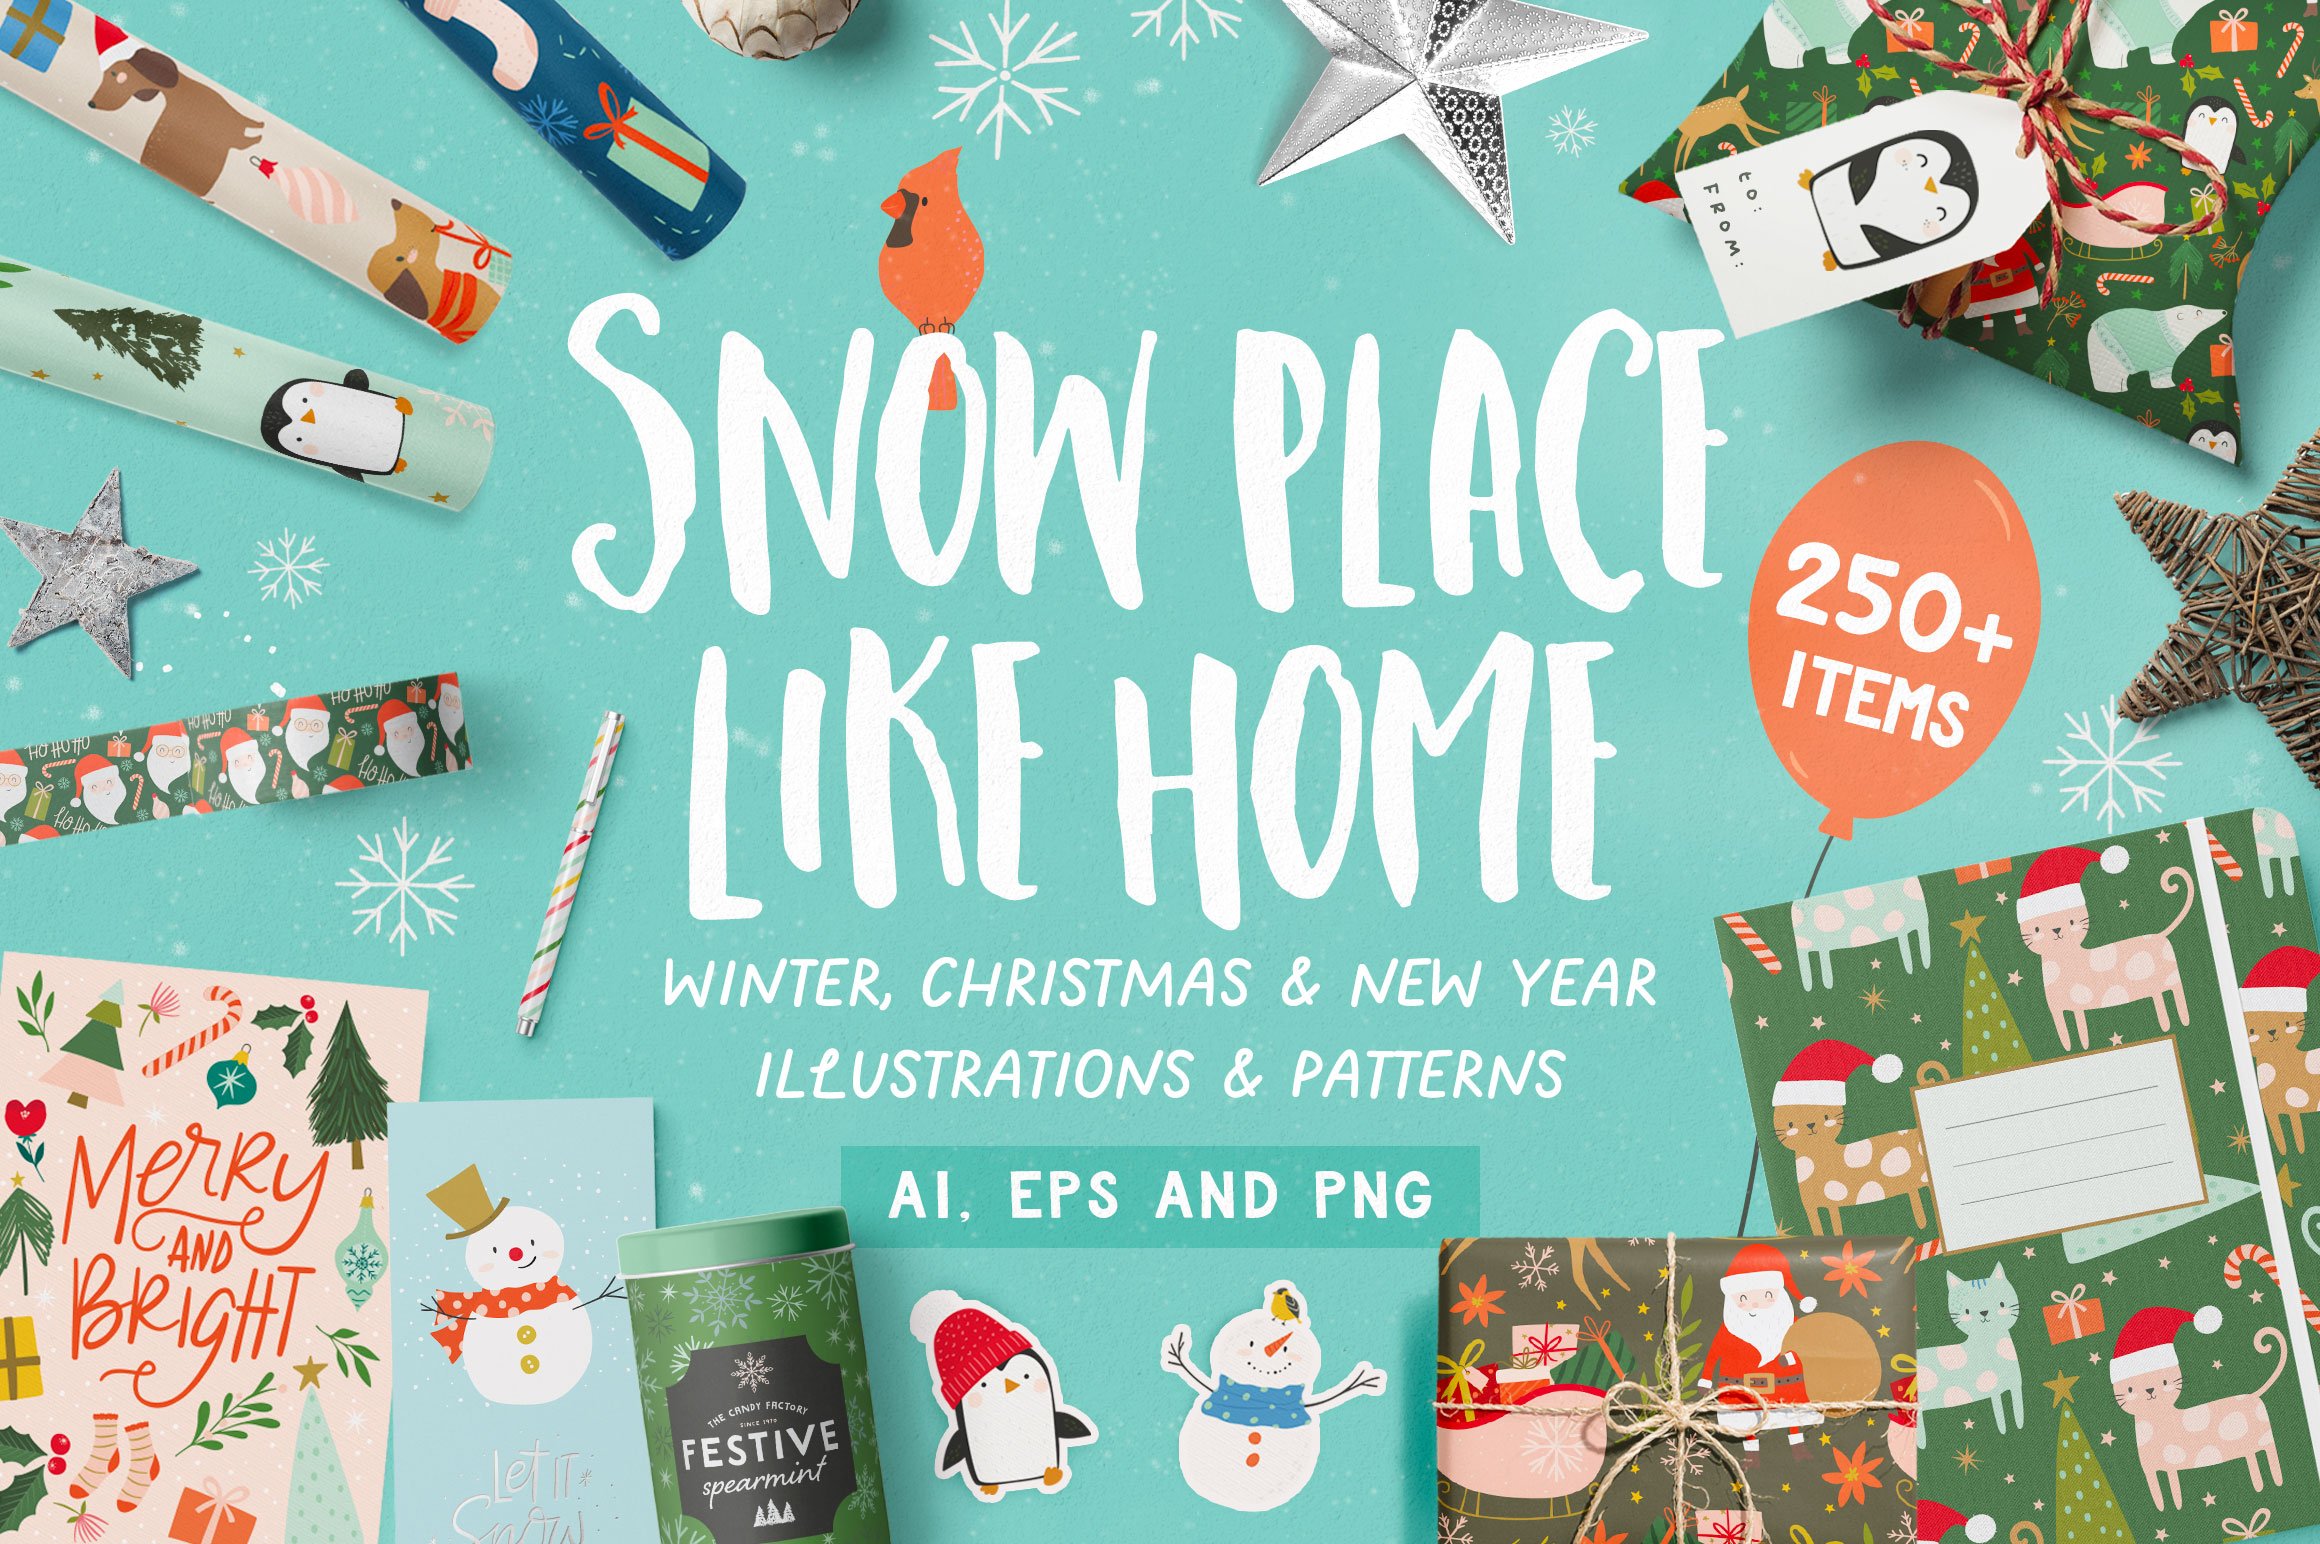 Snow Place Like Home - Christmas Illustrations - Design Cuts